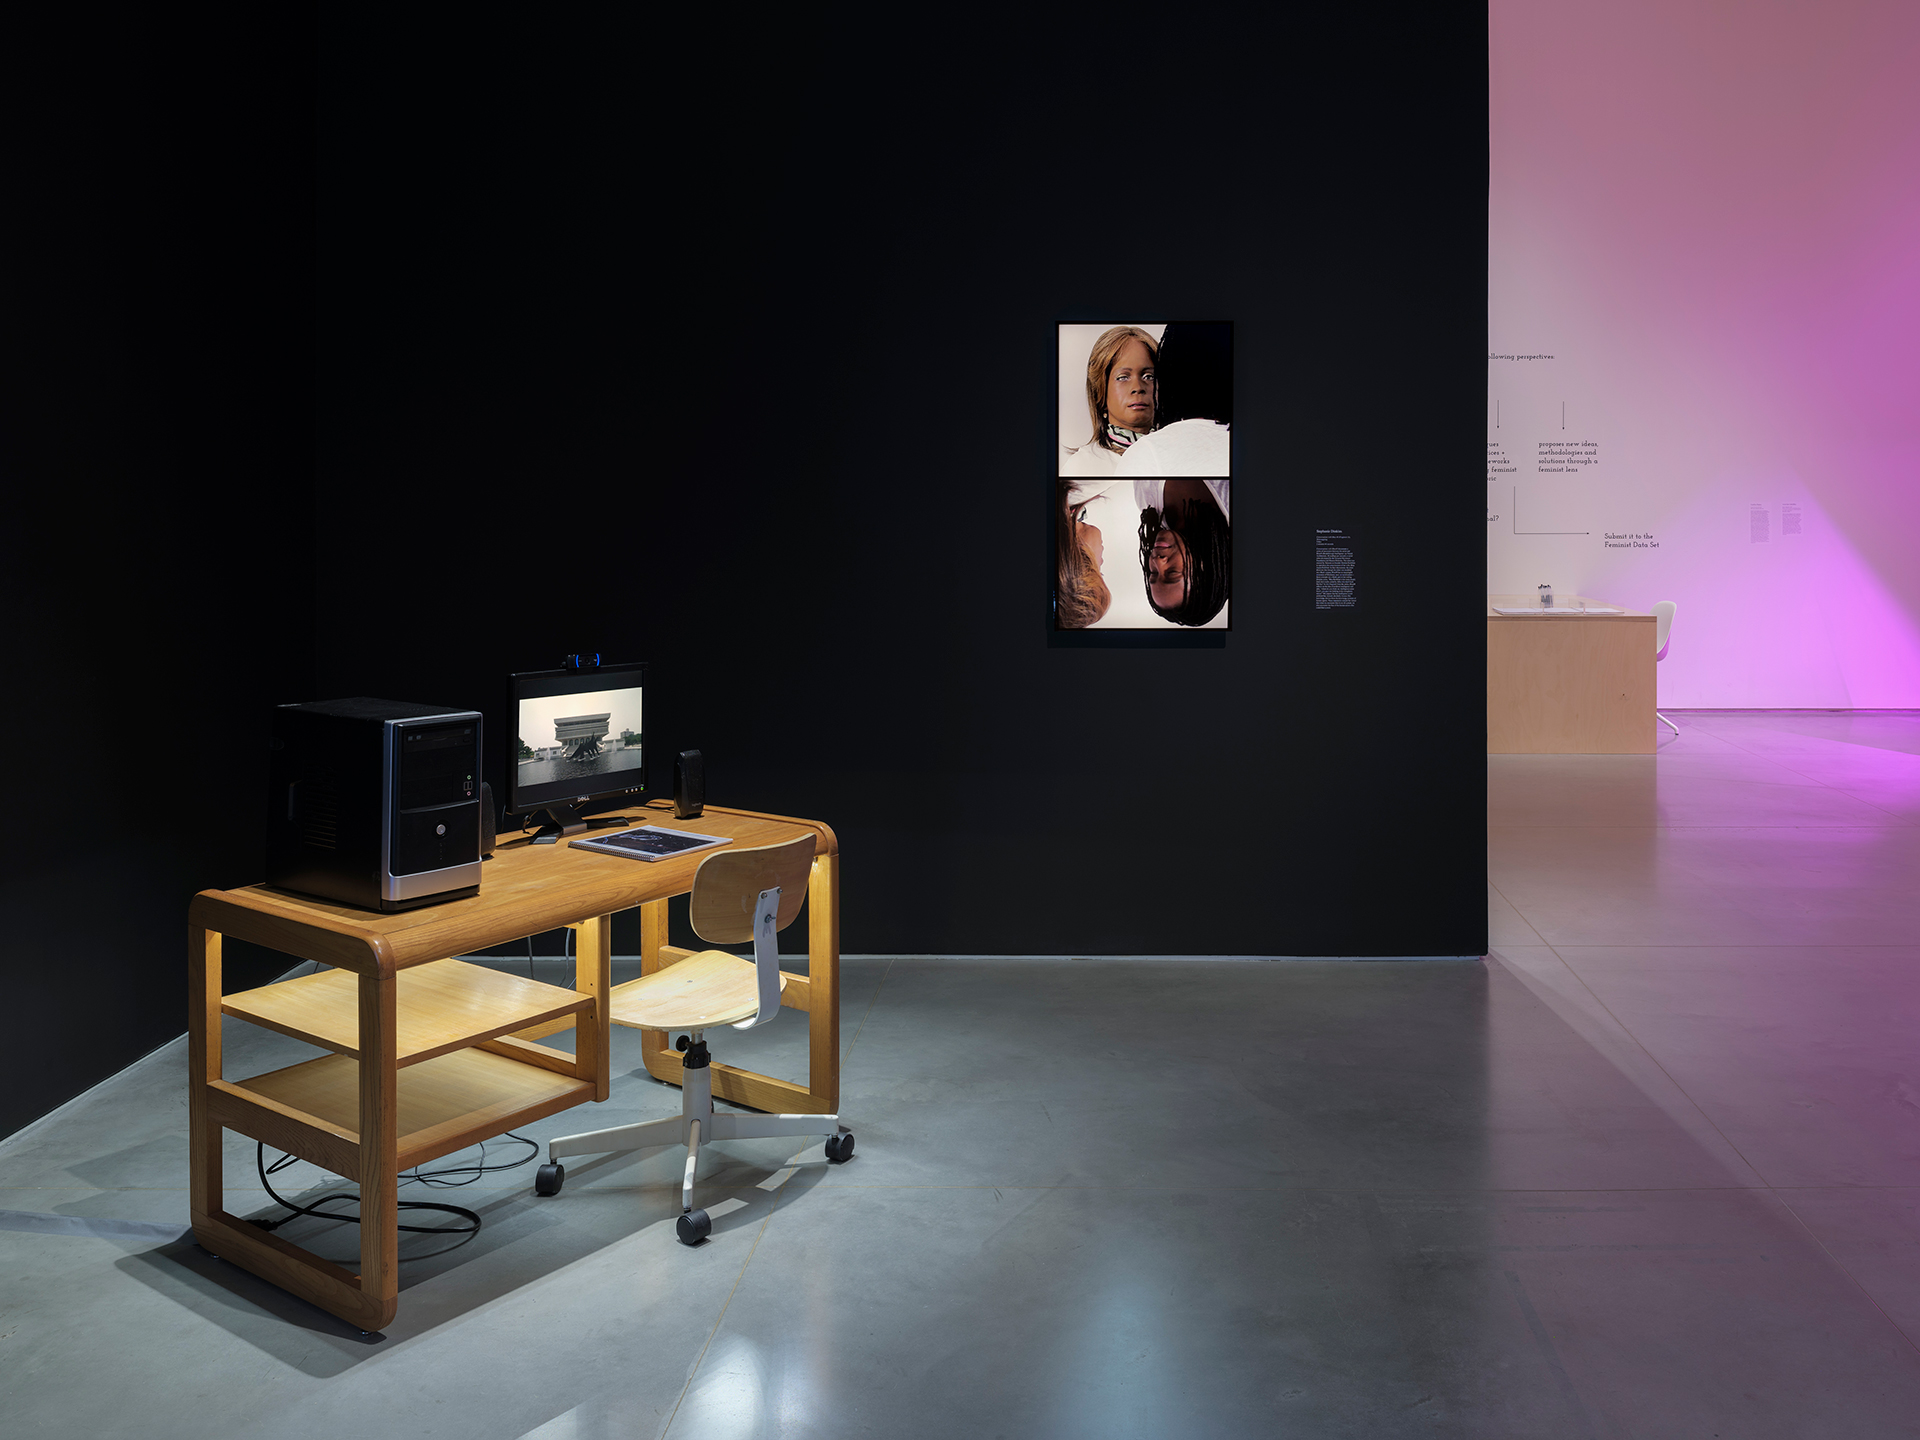 Gallery interior with a black wall and a gray floor. To the left, a wooden desk with a matching wooden chair holds a computer, a monitor, and a packet of paper. Mounted on the wall, to the right of the desk, a screen displays images of two women.